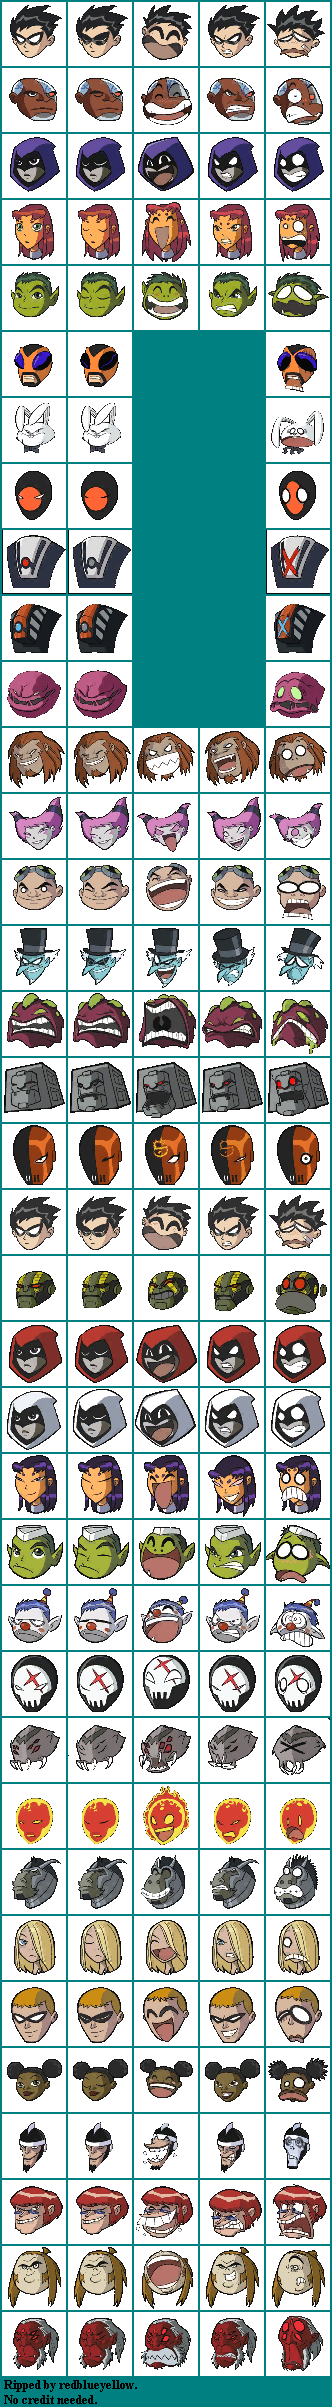 Teen Titans - Character Icons